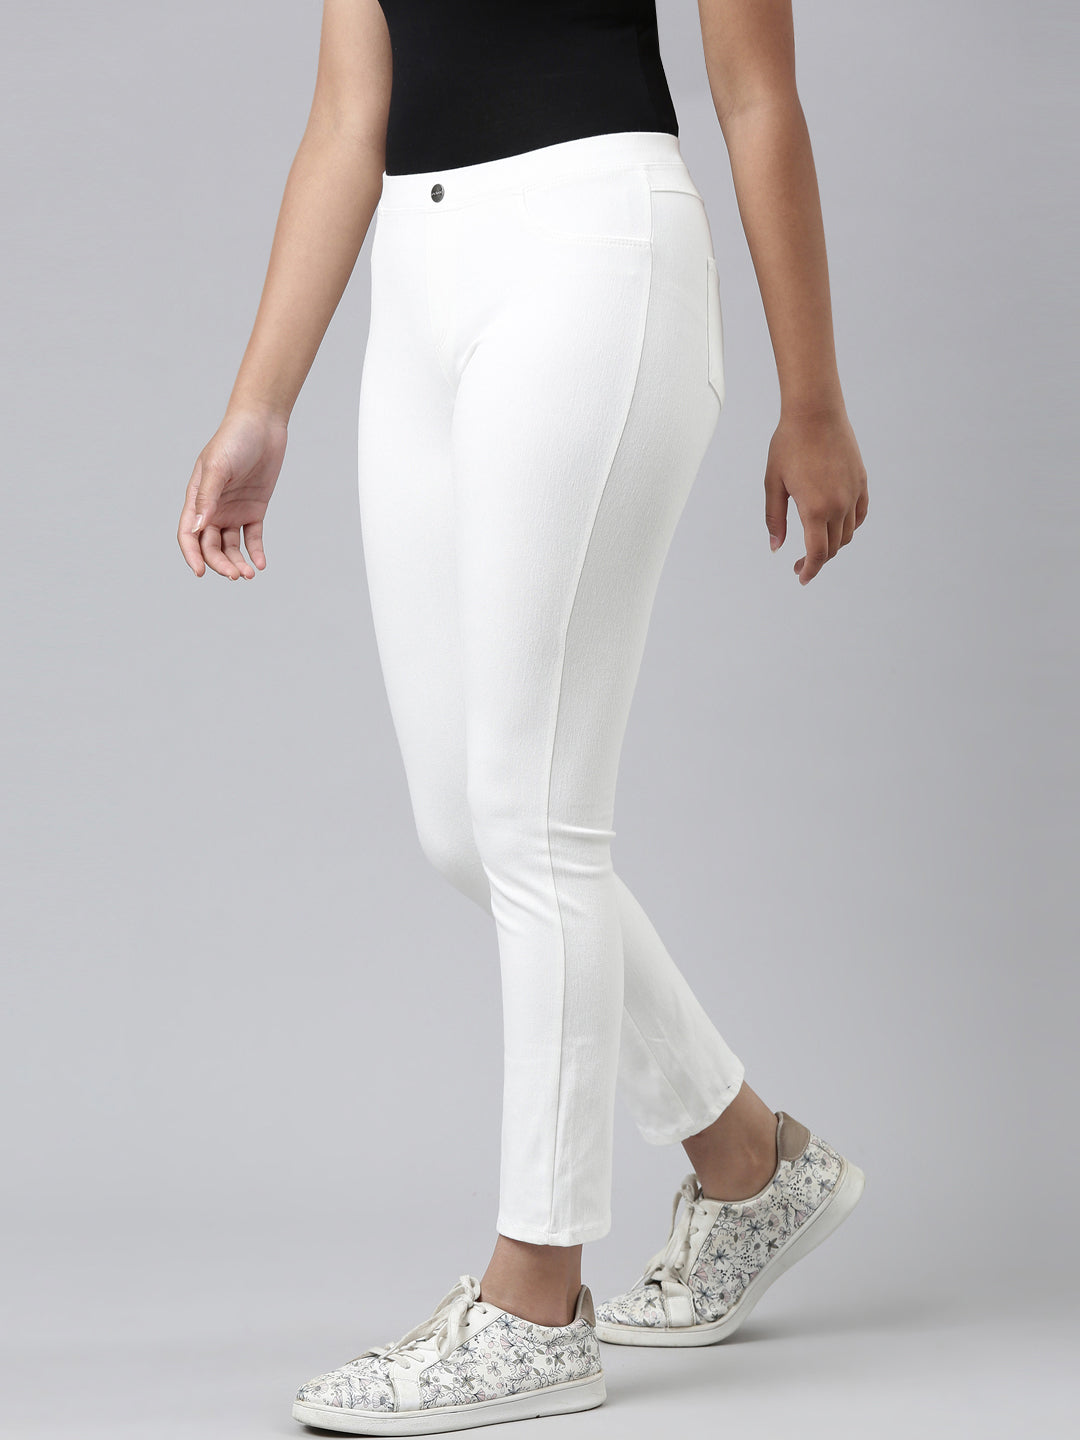 Buy Women Casual White Jogger Pants, Loose High Waisted Elastic Pants for  Junior Teen Girls at Amazon.in